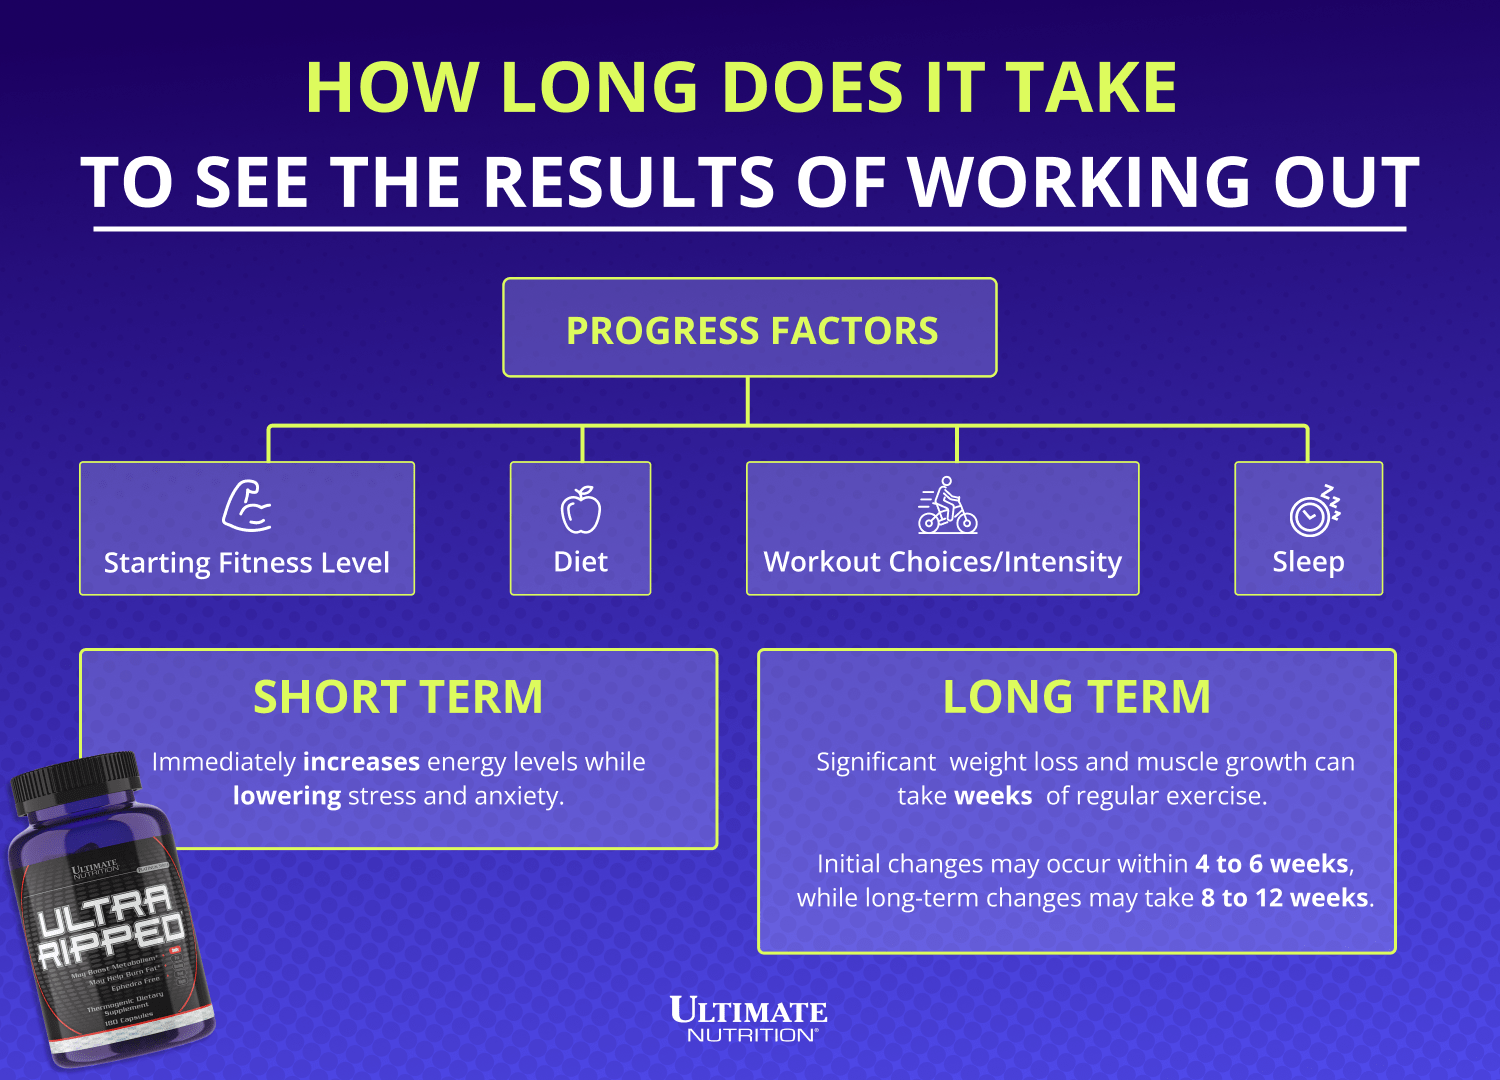 How Long Does it Take to See the Results of Working Out?